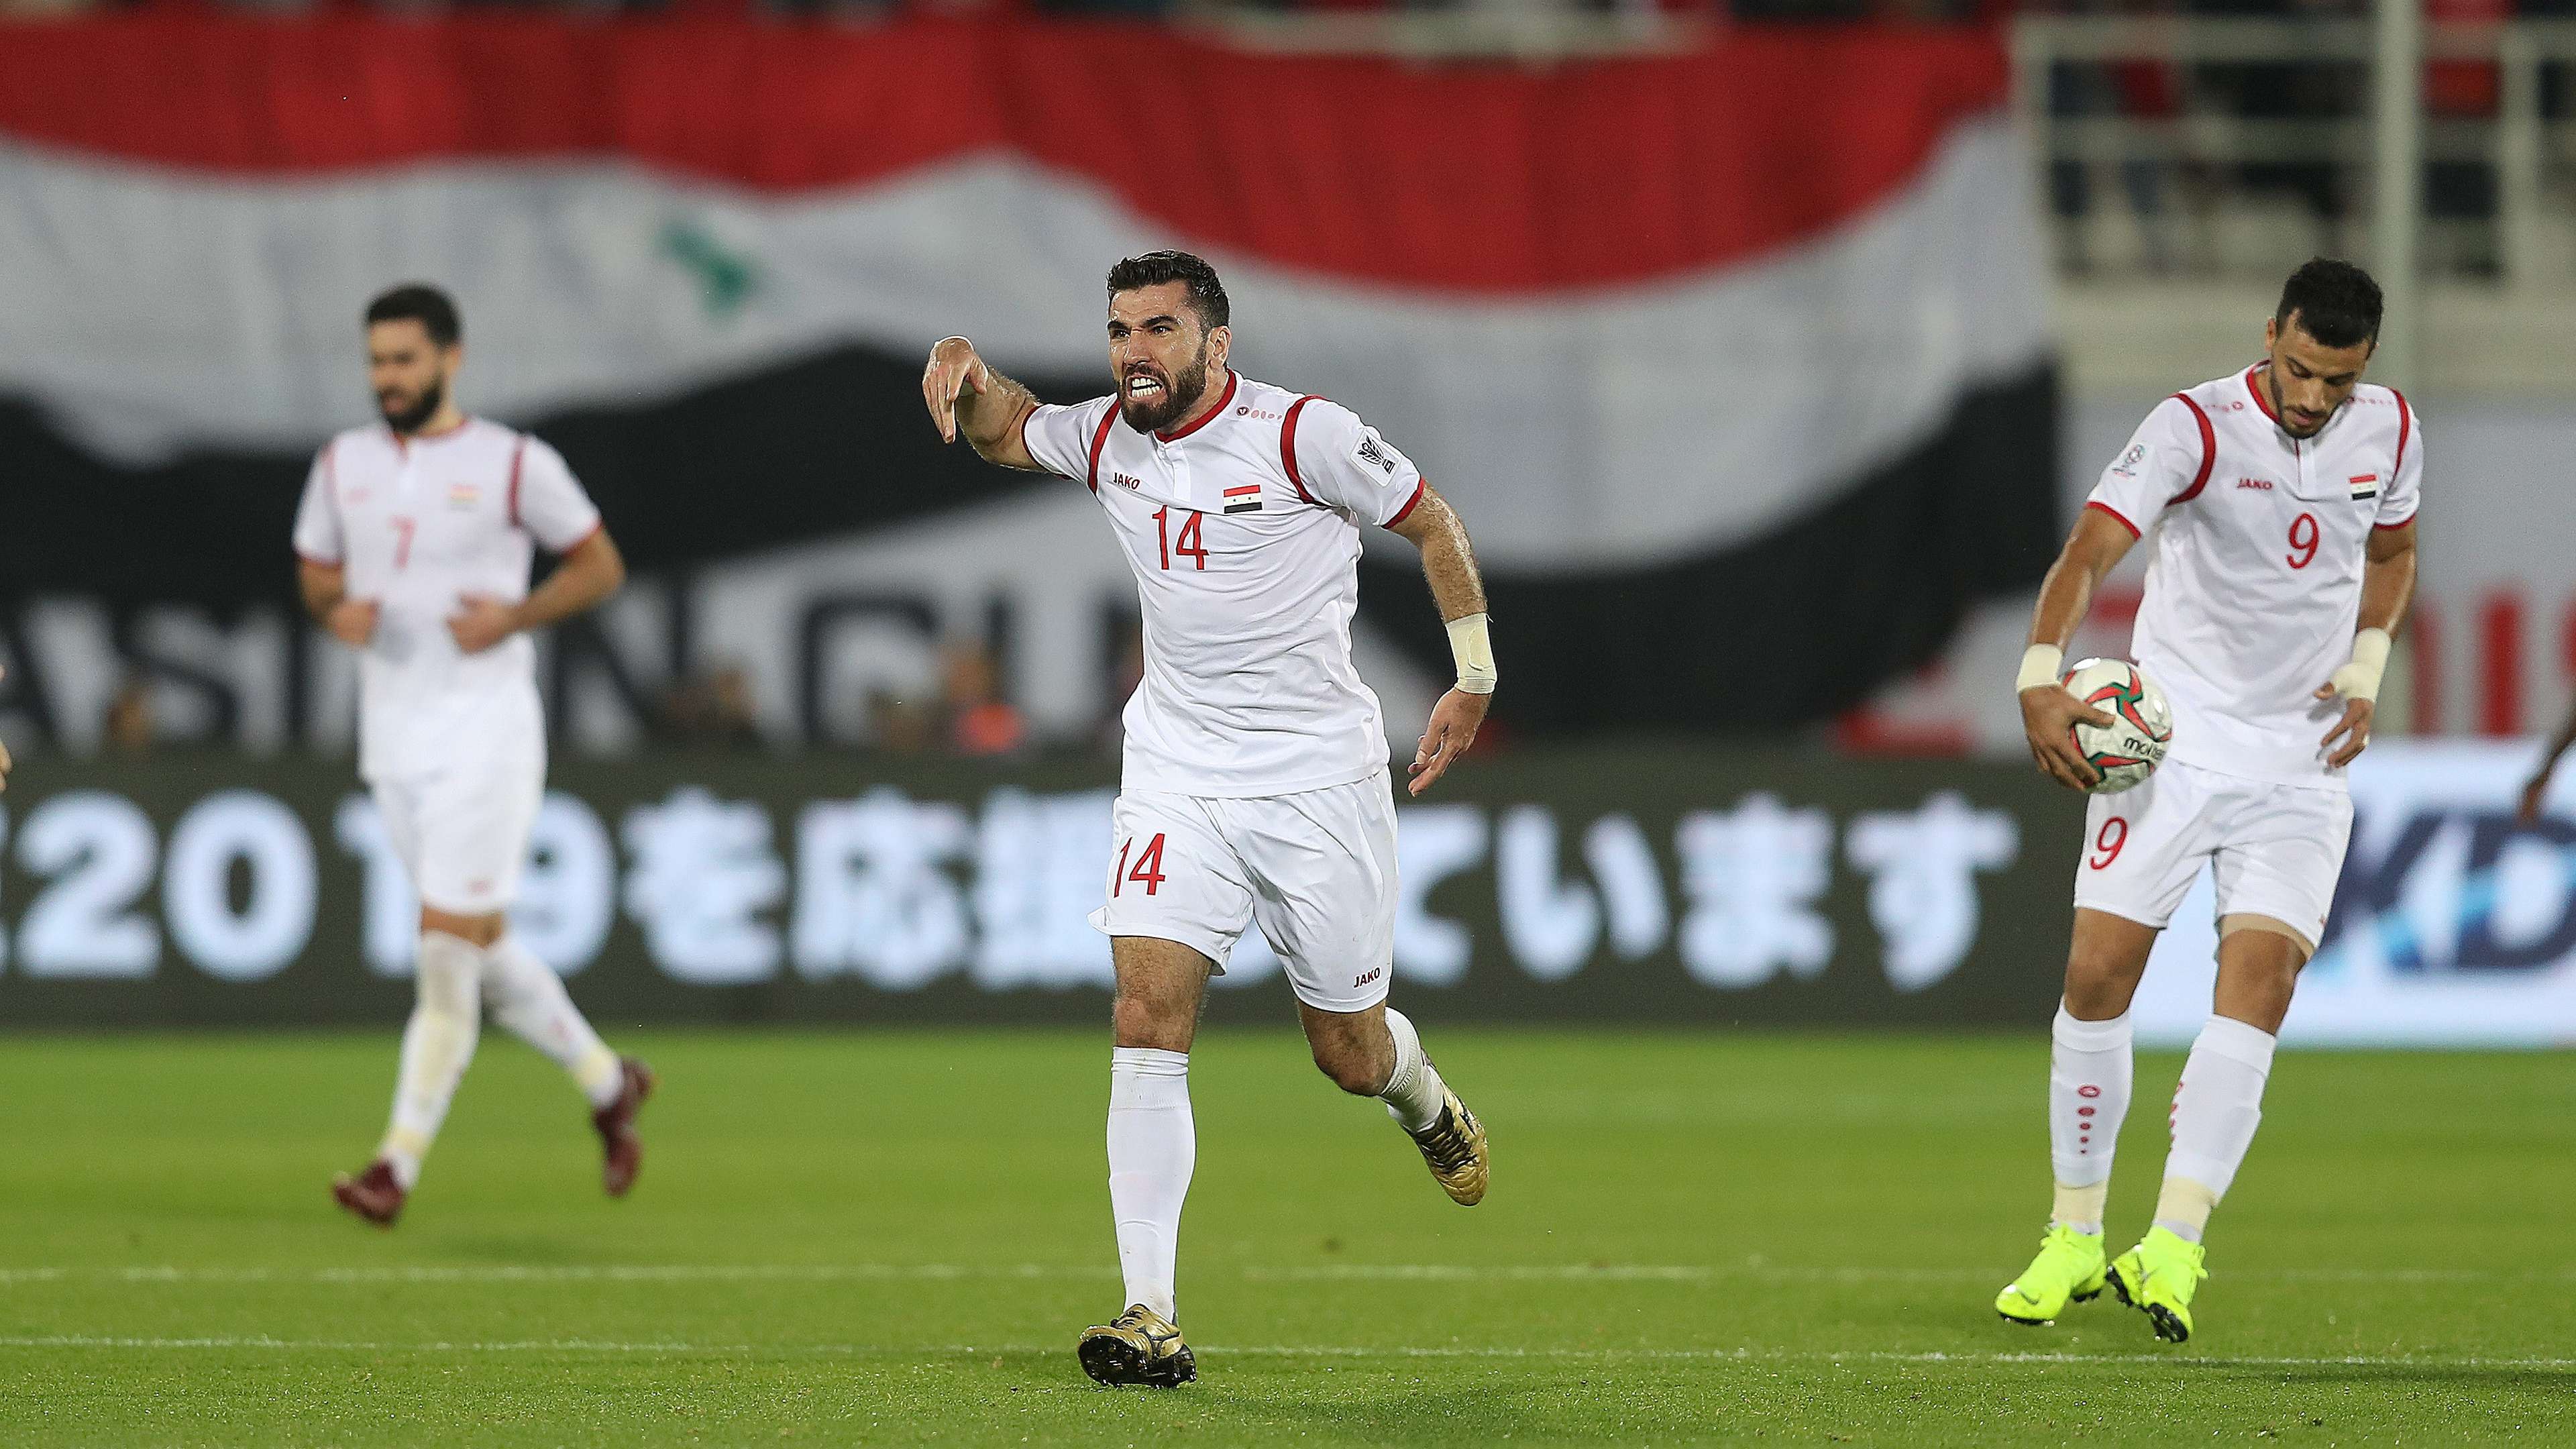 Syria AFC Asian Cup 2019